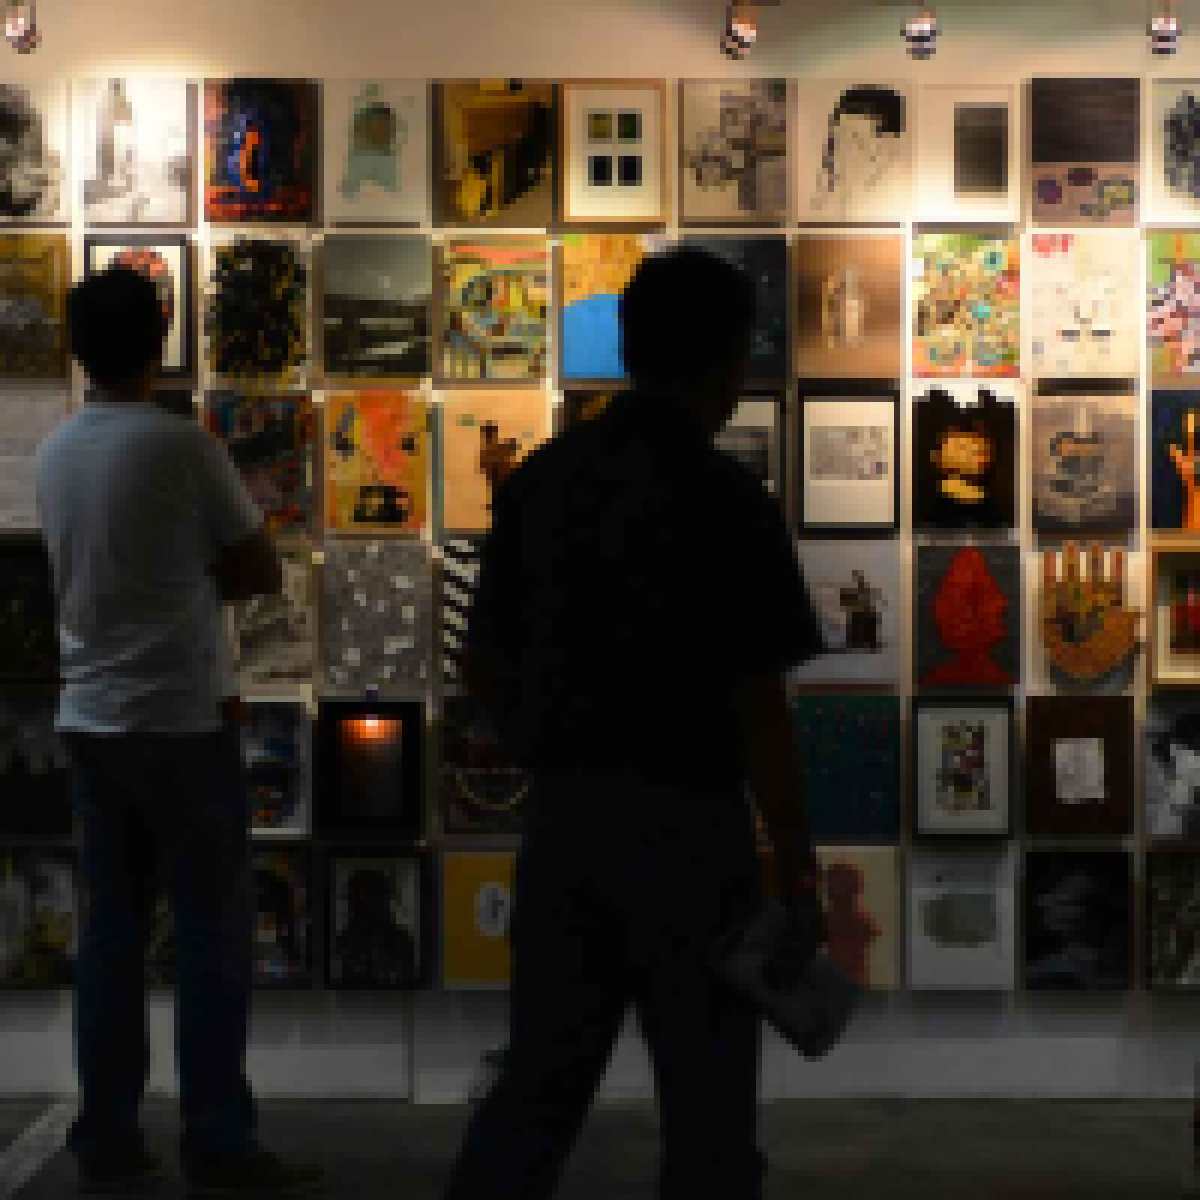 Art Fair Philippines 2017 goes beyond the room with Talks, Tours and more international artists